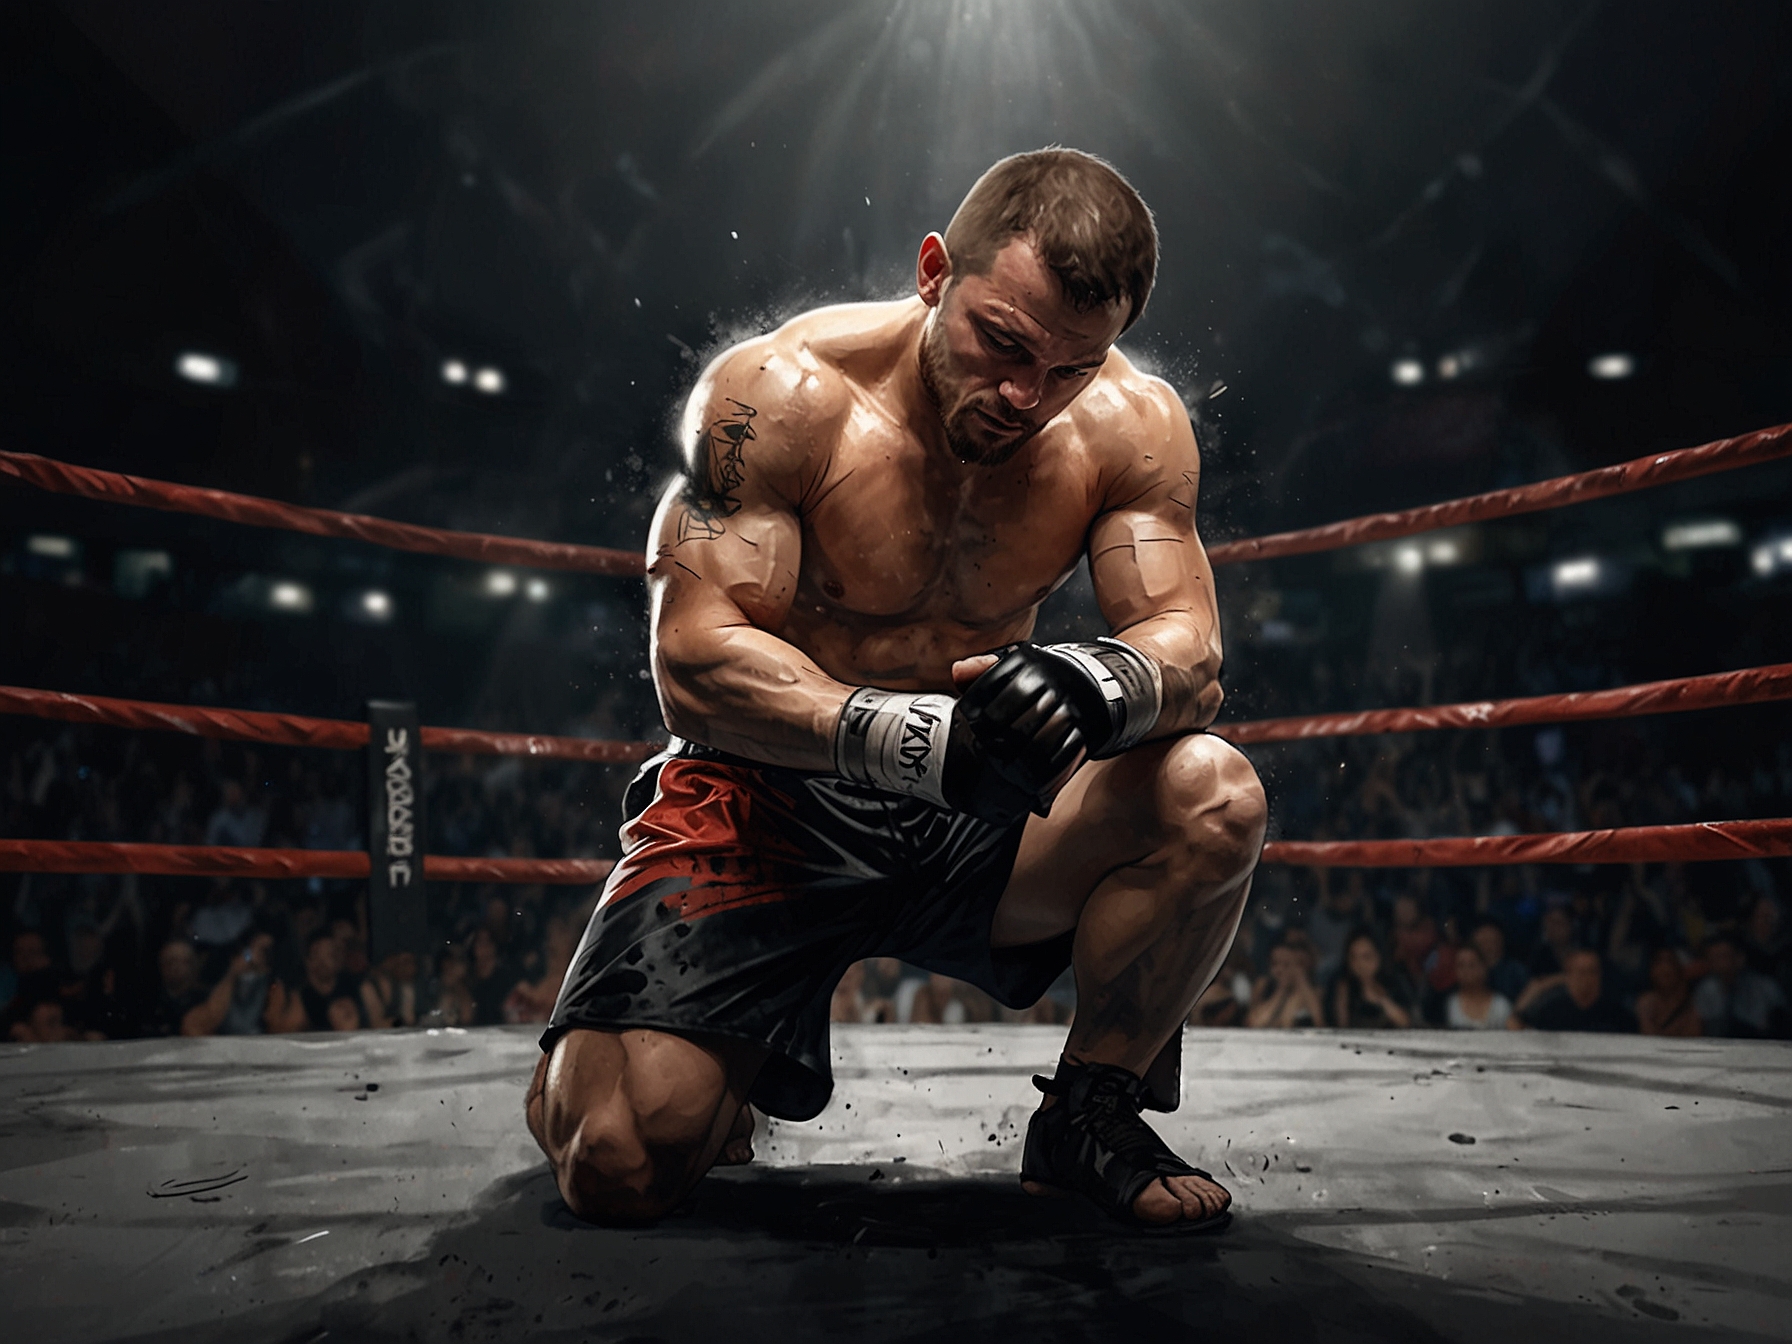 An MMA fighter, visibly bruised and exhausted, kneels in the center of the ring immediately after his defeat. The arena lights cast a harsh glare as he nervously presents a ring to his girlfriend.